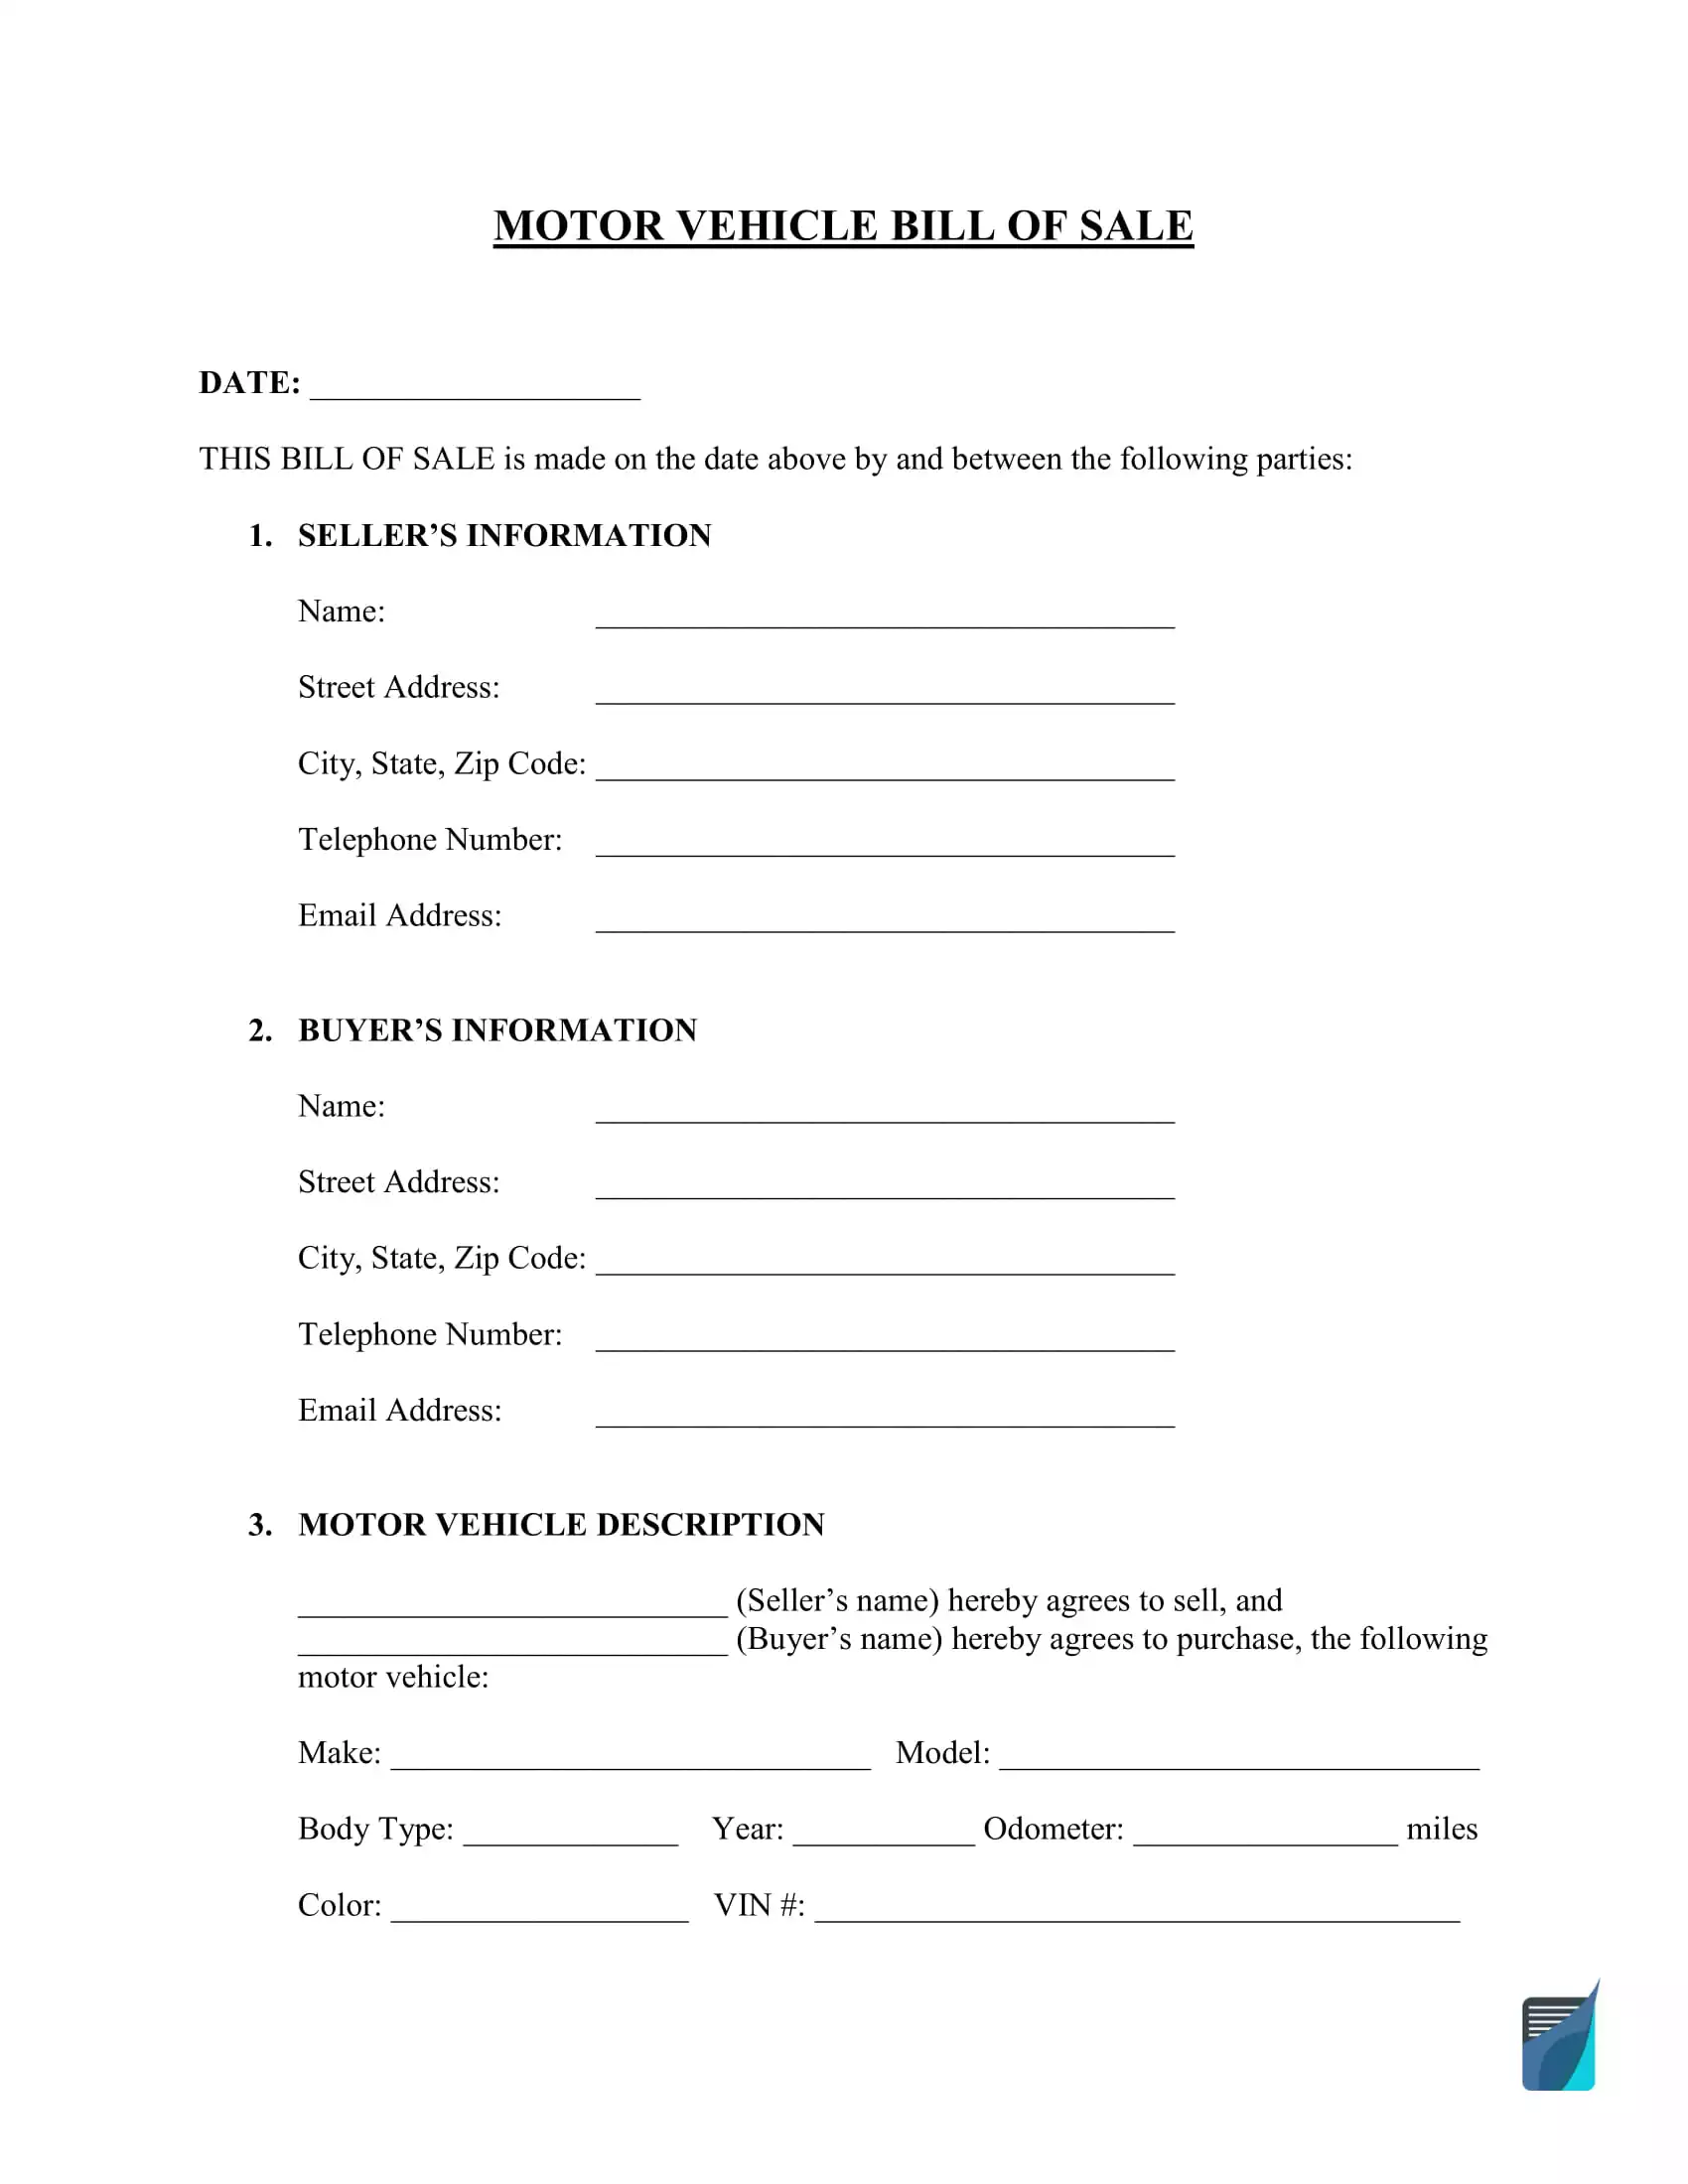 Bill of Sale Template - Free PDF  Word Forms - FormsPal Pertaining To Vehicle Bill Of Sale Template Word